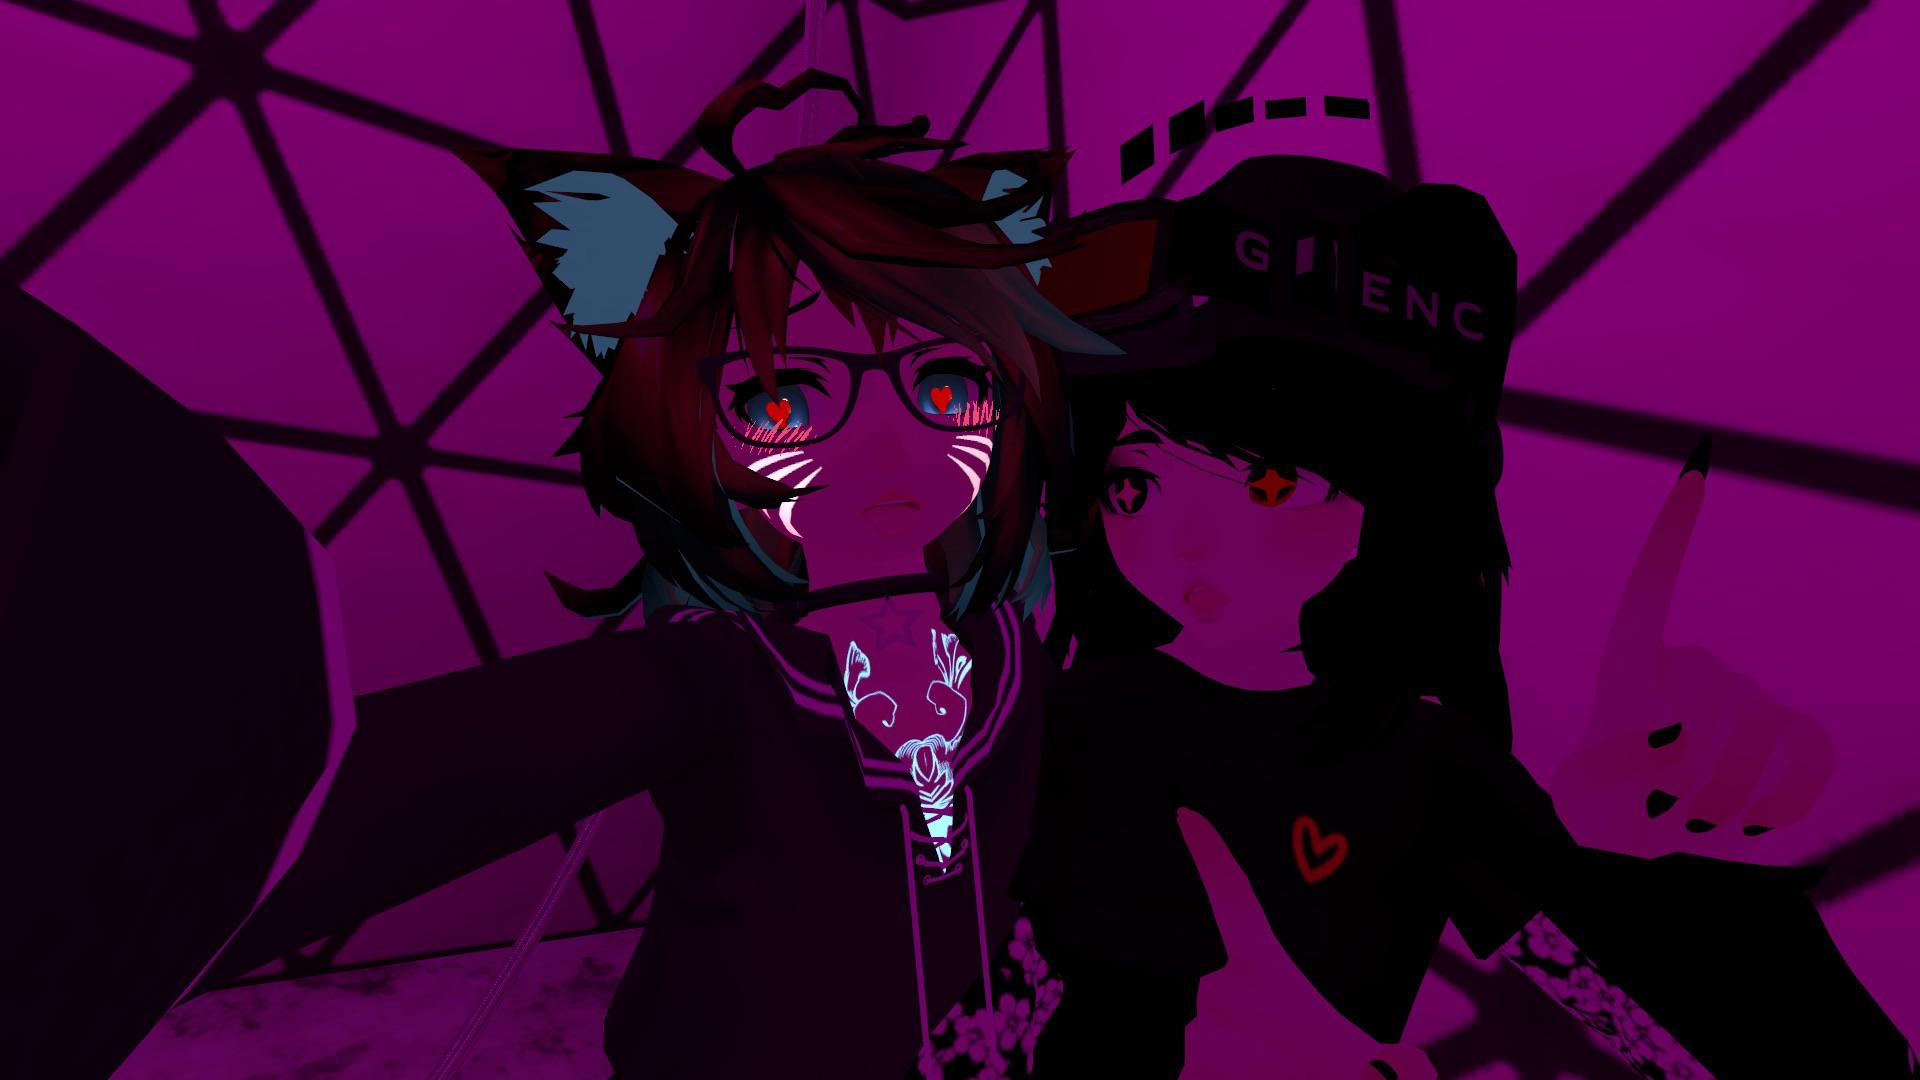 I love my friends in VR chat they're so awesome